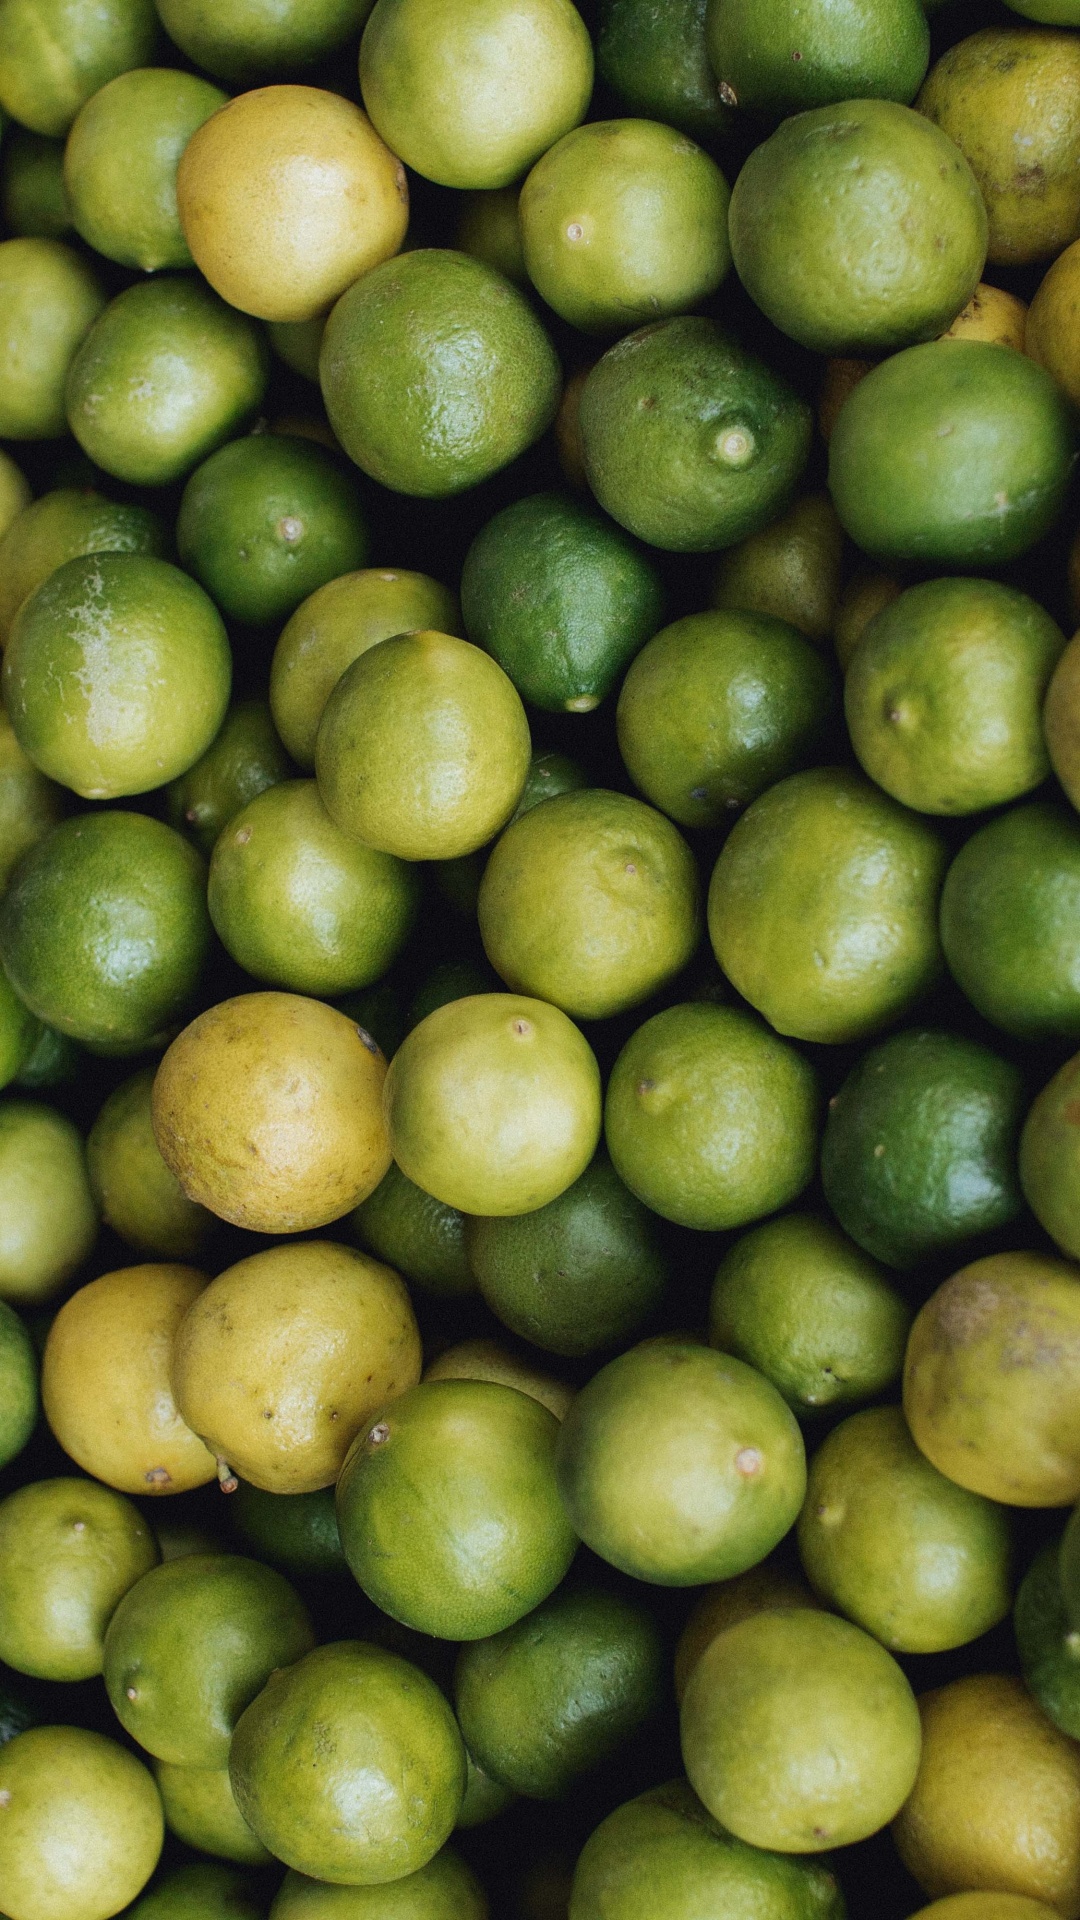 Green and Yellow Round Fruits. Wallpaper in 1080x1920 Resolution